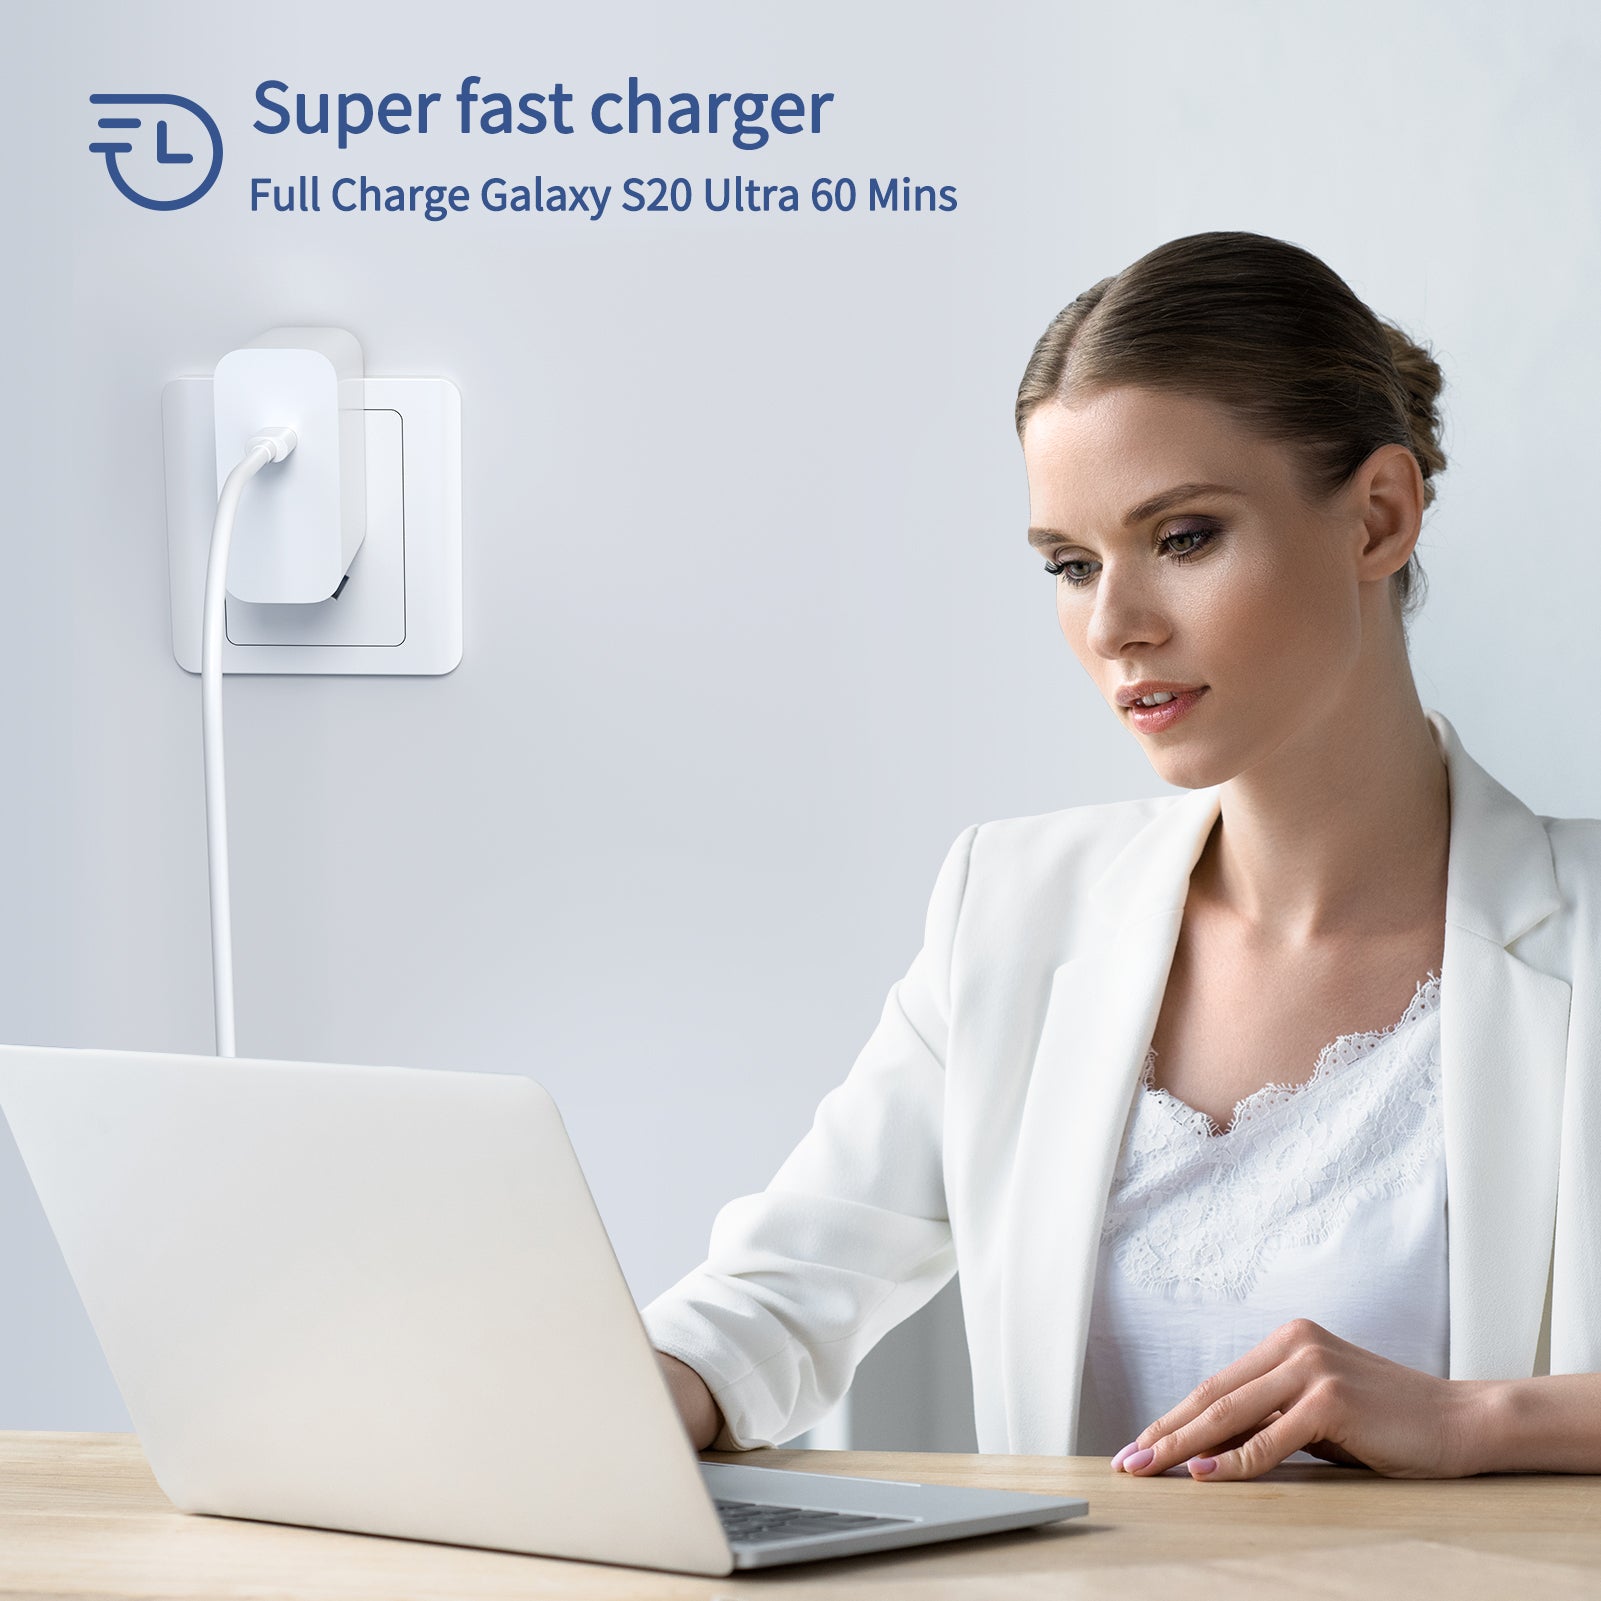 45W USB C Super Fast Charger，Ablegrid Type C Wall Charger Block with 6FT Android Phone Charger Cable for Galaxy S23 Ultra/S23/S23+/S22+/S22 Ultra/S22+/Note 20/S20/S21, Galaxy Tab S7+/S8+ 2pack